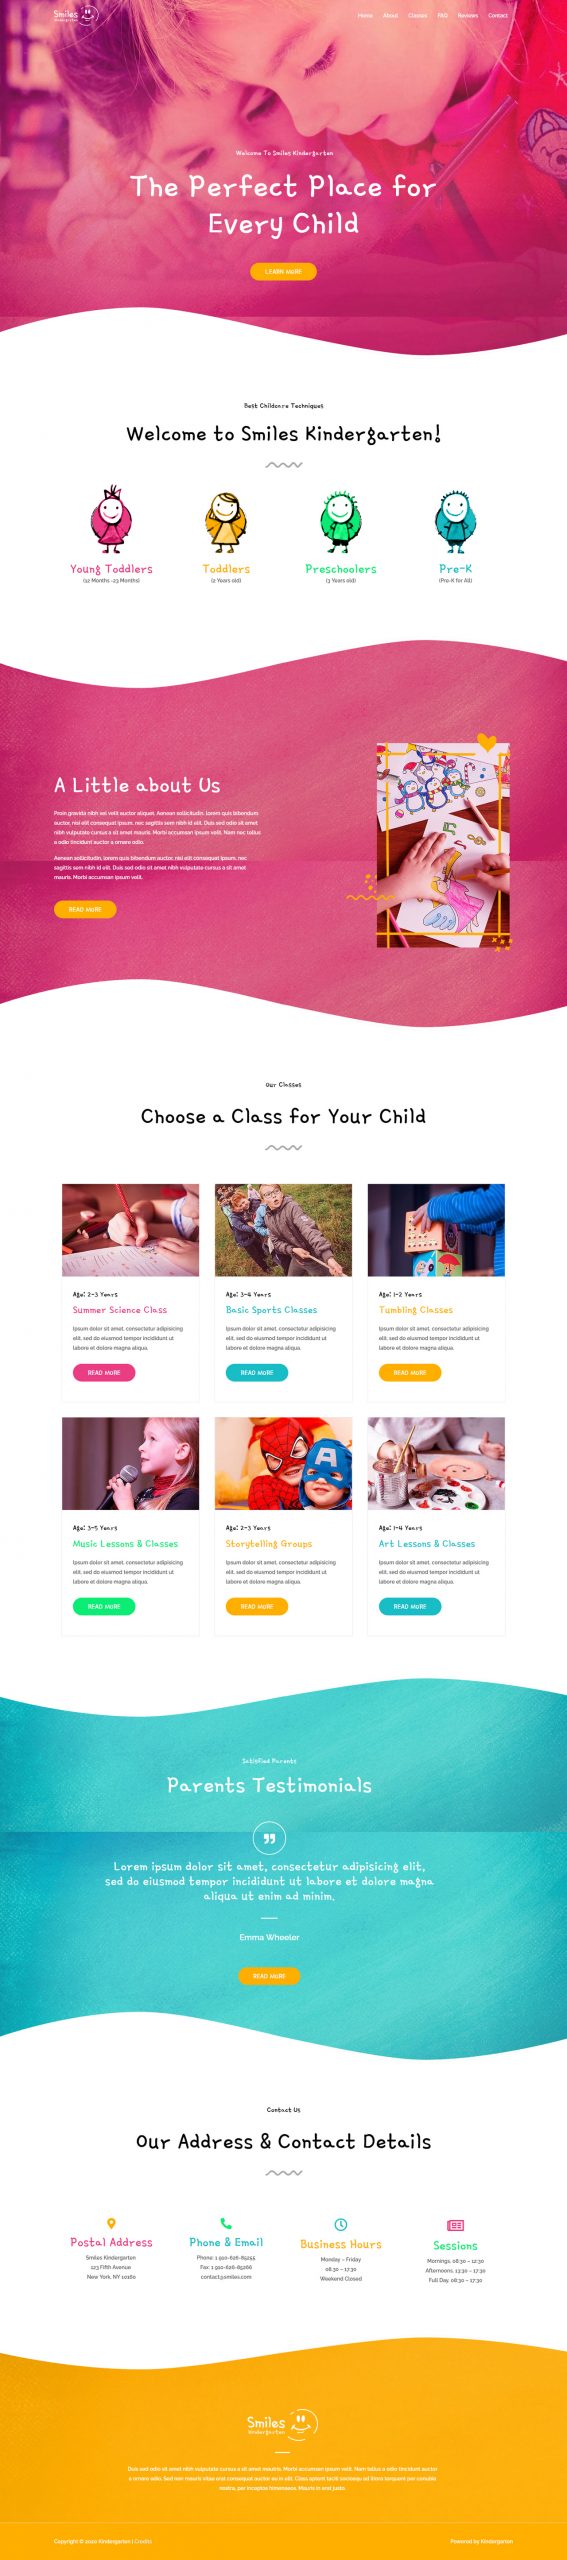 Fagowi.com Website Design Templates For Kindergarten Day Care - Home Page Image